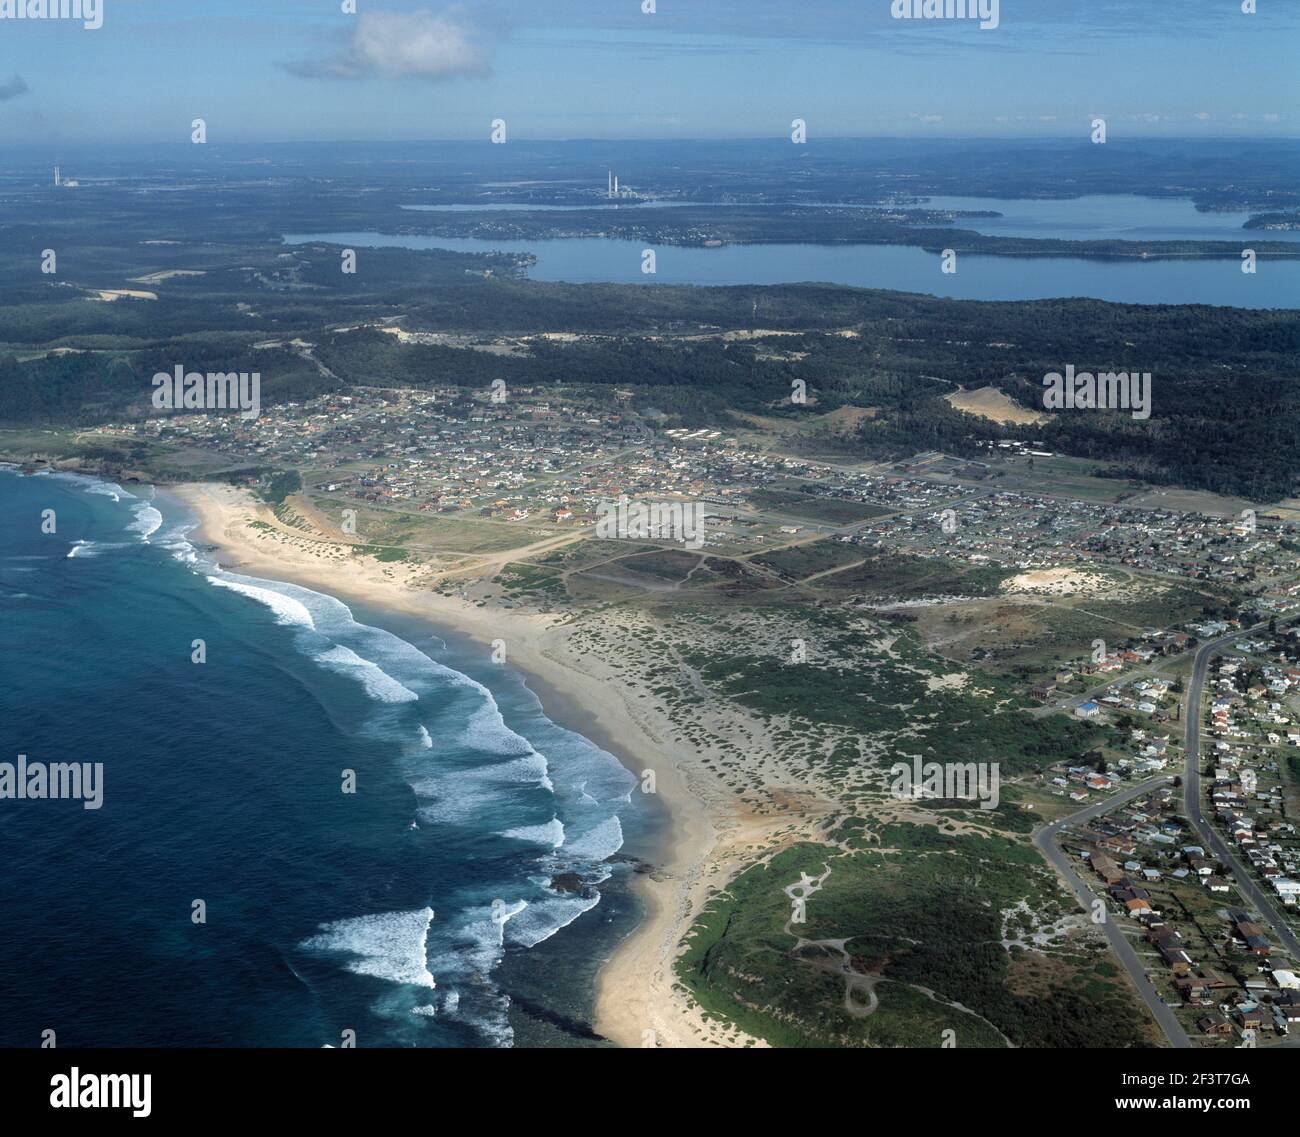 Australia. New South Wales. Central Coast region. Aerial view of Swansea with Caves Beach coastline. Stock Photo